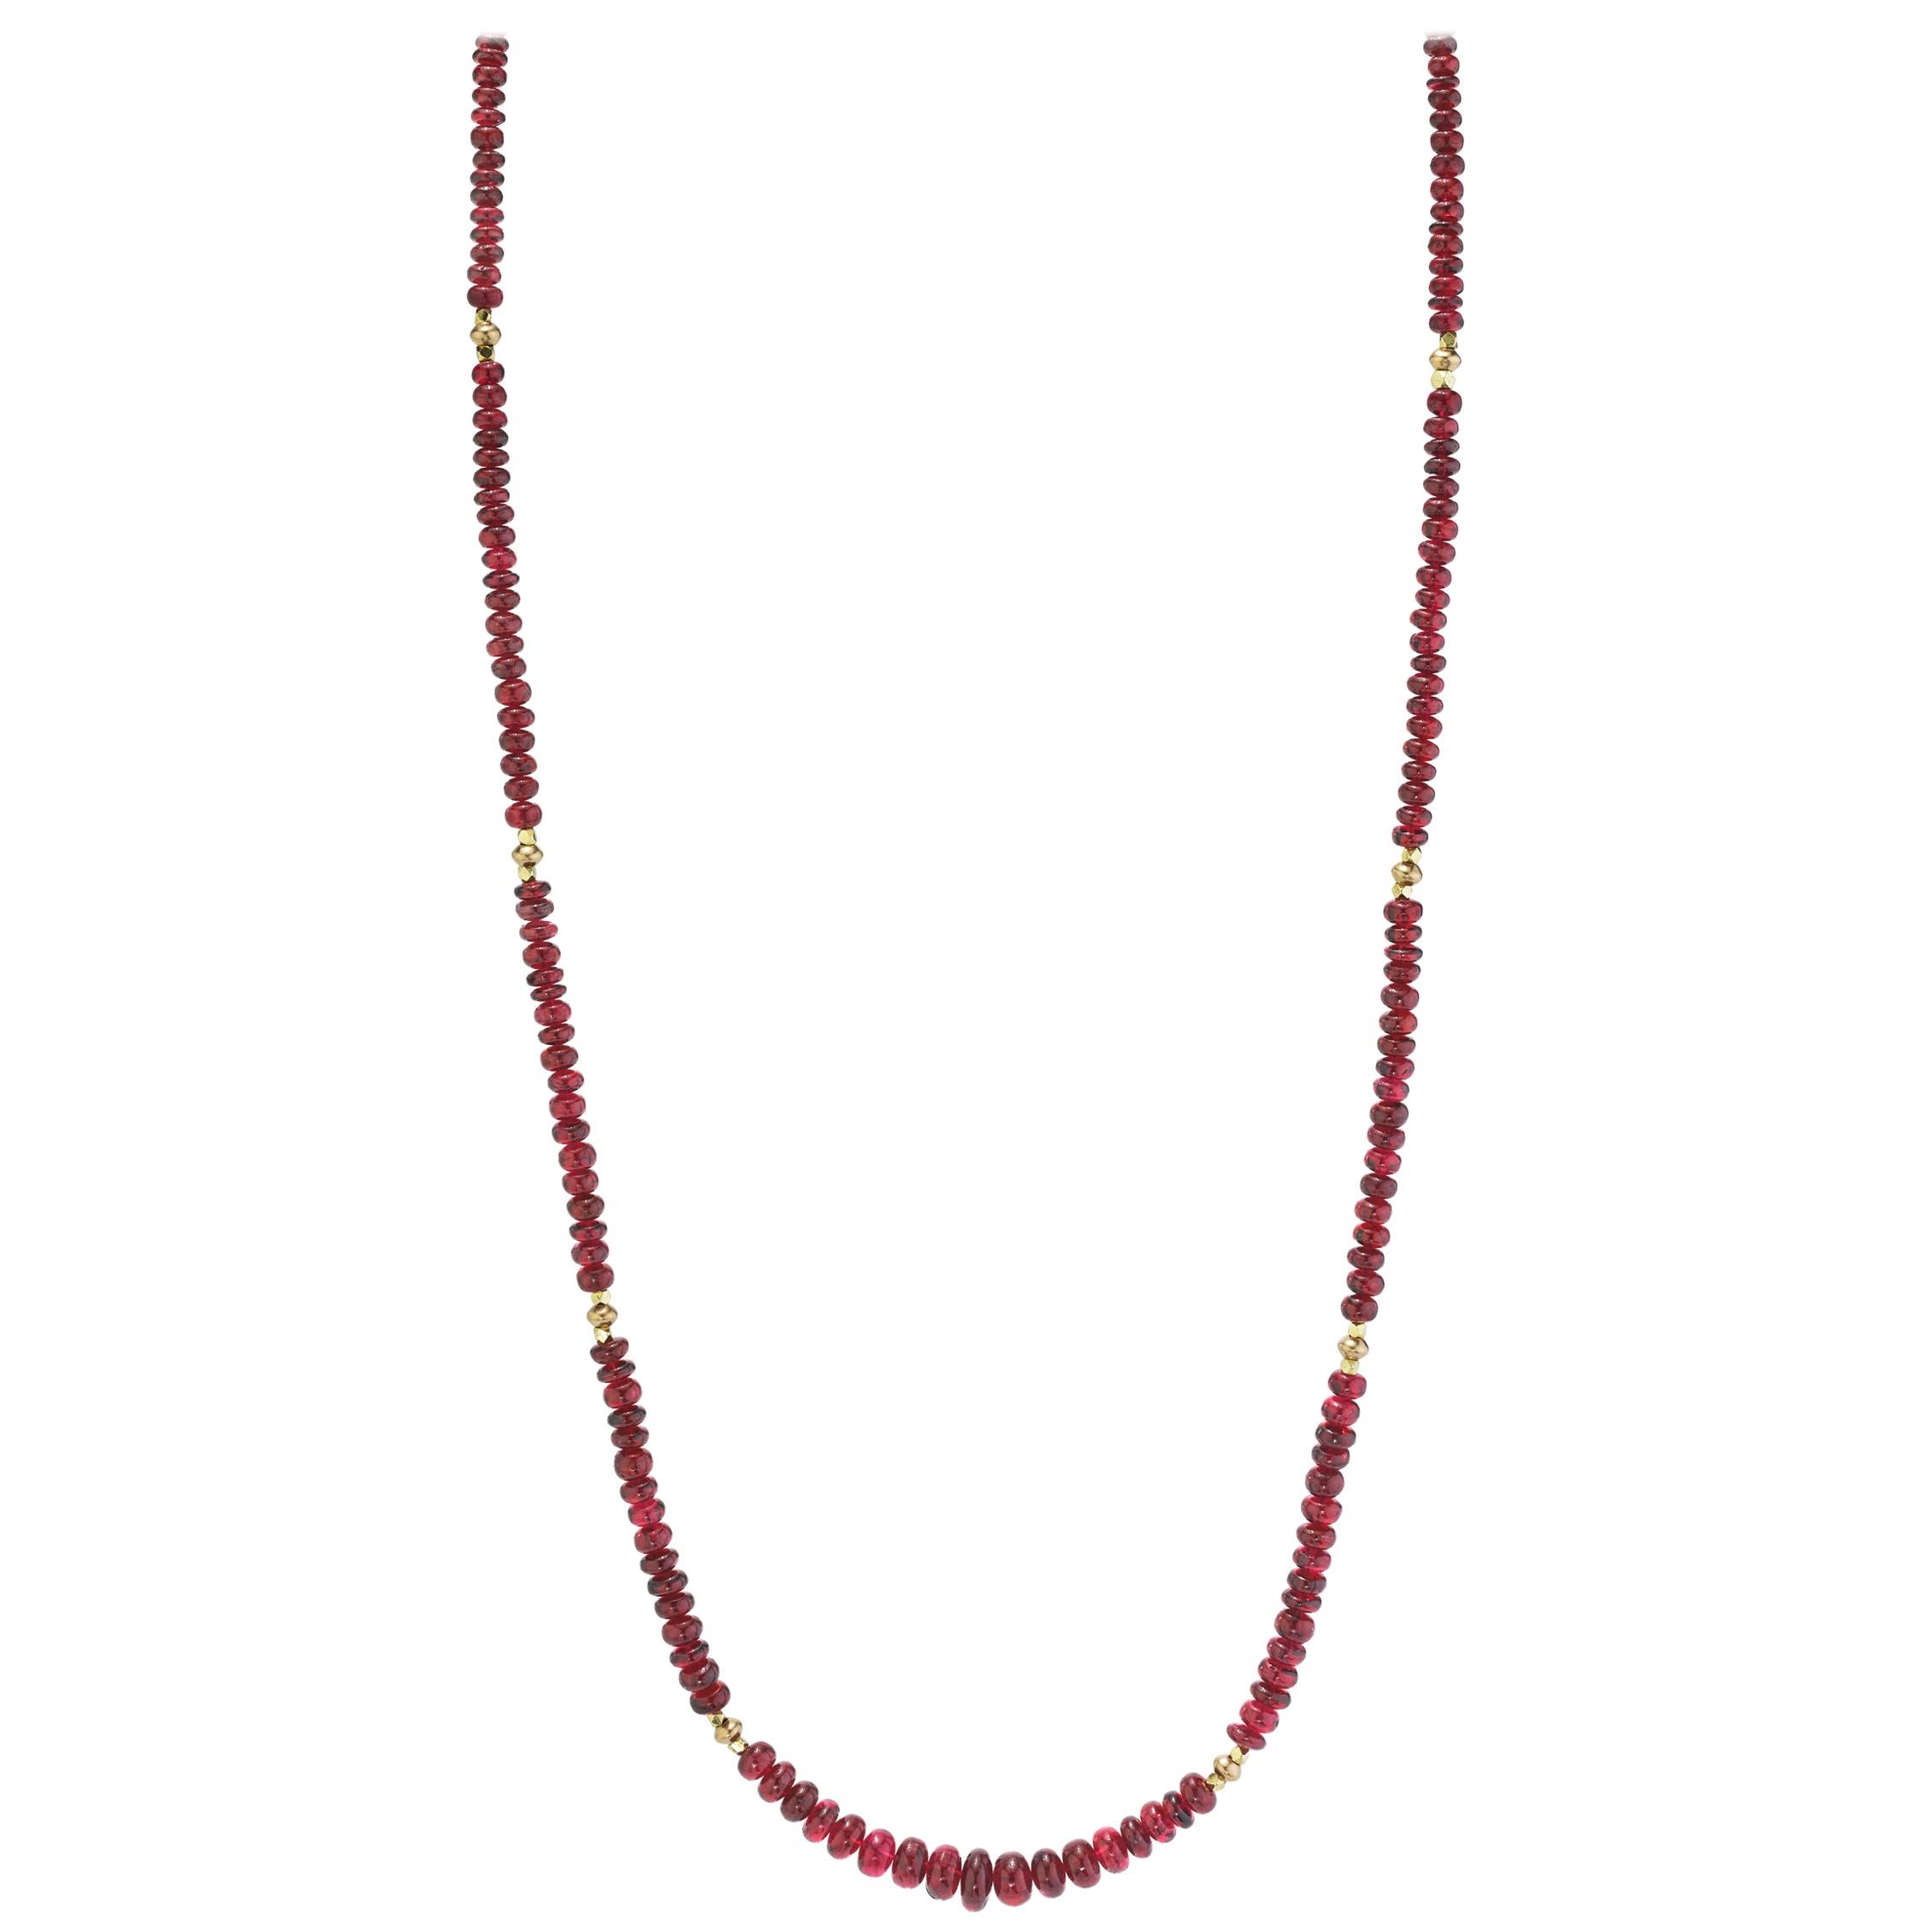 This strand of fine quality spinel beads would be at home in a 19th century ballroom or a 21st century boardroom! Rich, pomegranate red oval rondelles have been hand strung with 22k yellow gold spacers and an 18k yellow gold clasp in an elegant